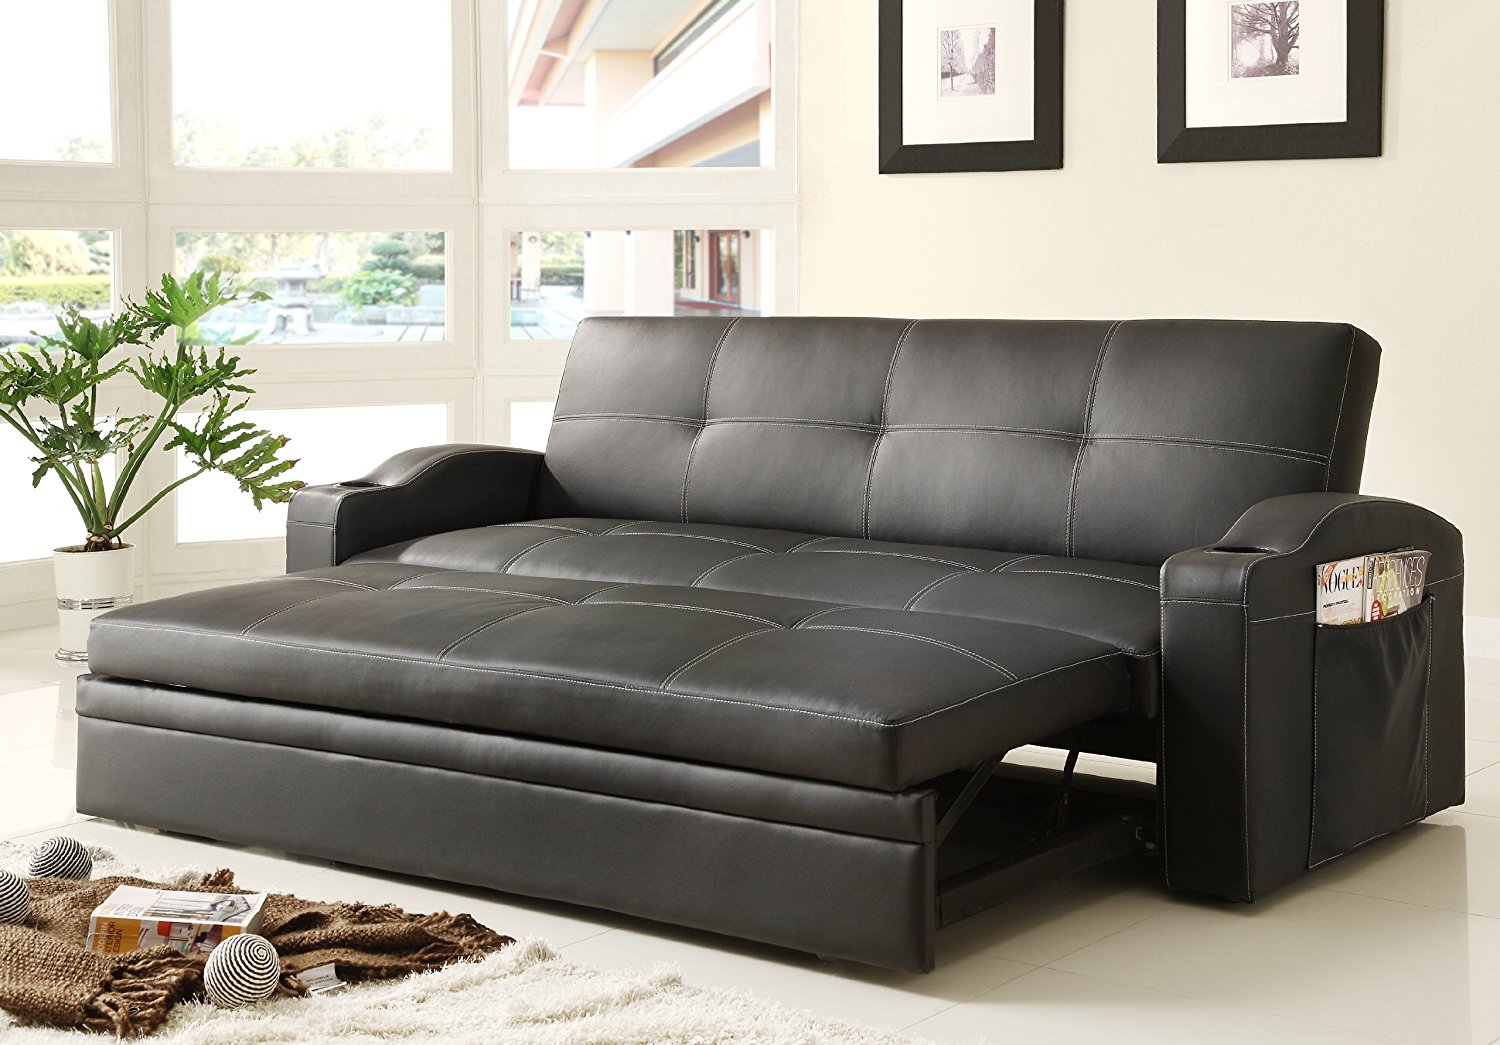 Sofa Beds And Futons – Enjoy The Faculty Of Bed And Sofa Both